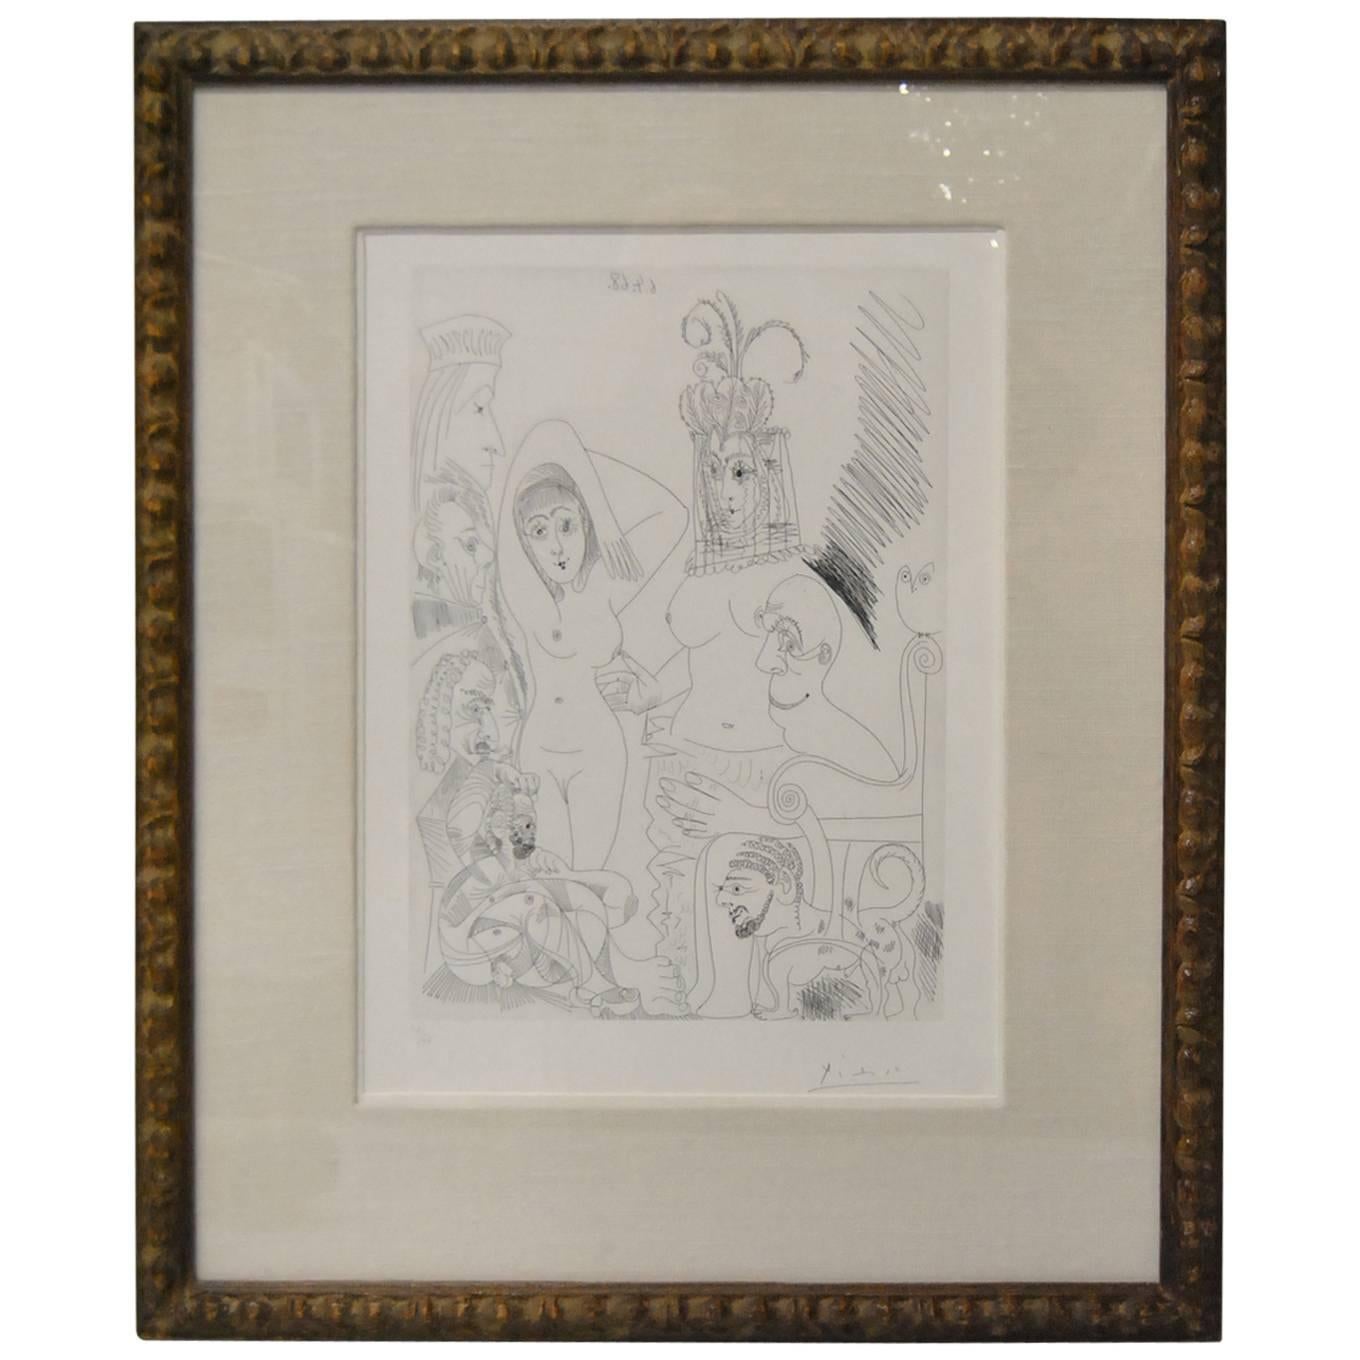 Pablo Picasso Signed Etching, Plate #17 of the "347" Series. Numbered 43/50